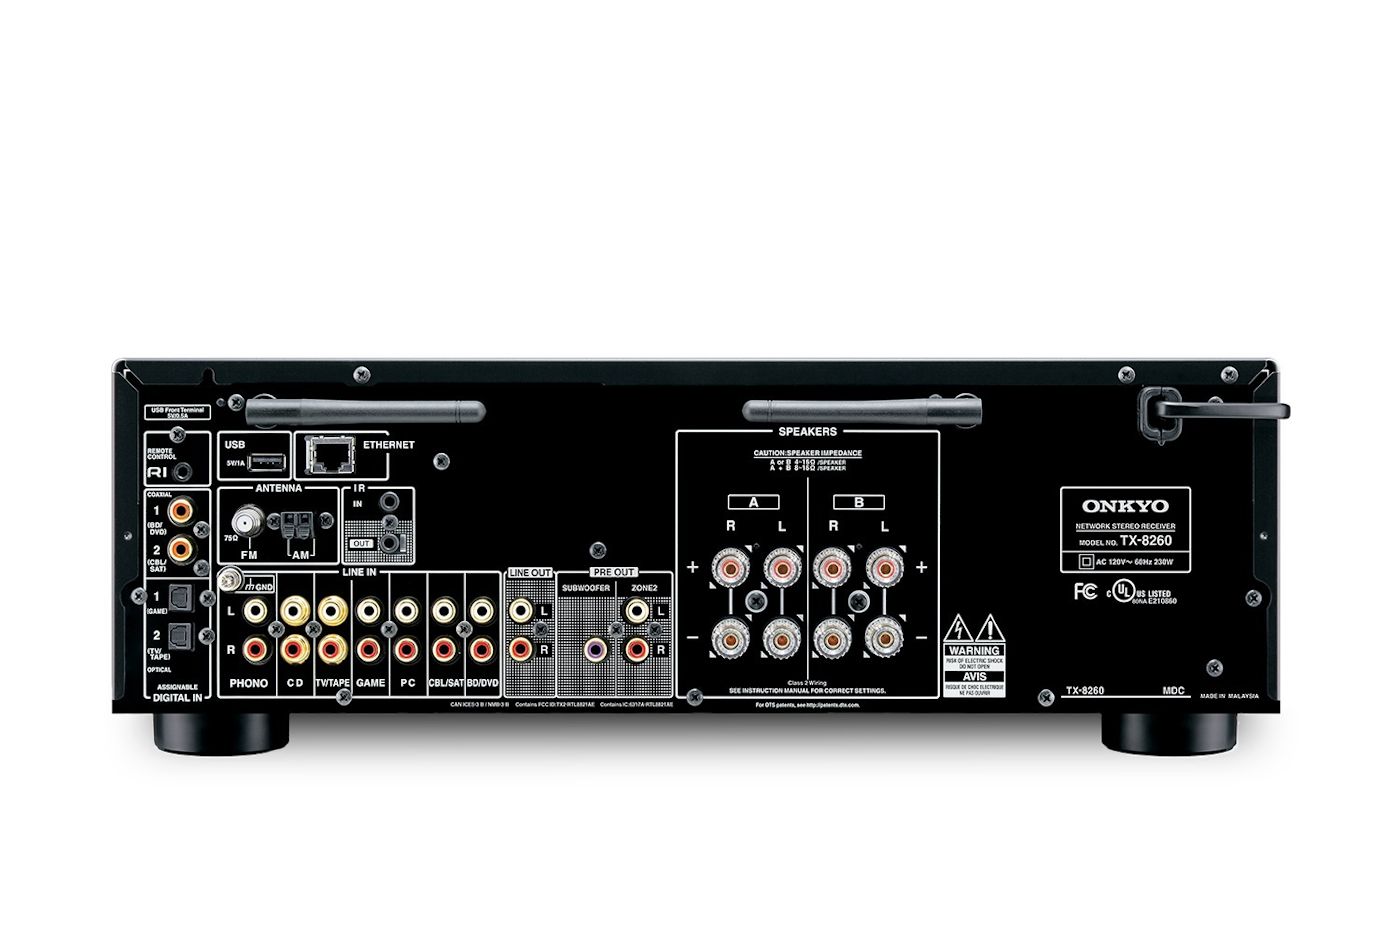 Onkyo TX-8260 Stereo Receiver Back View